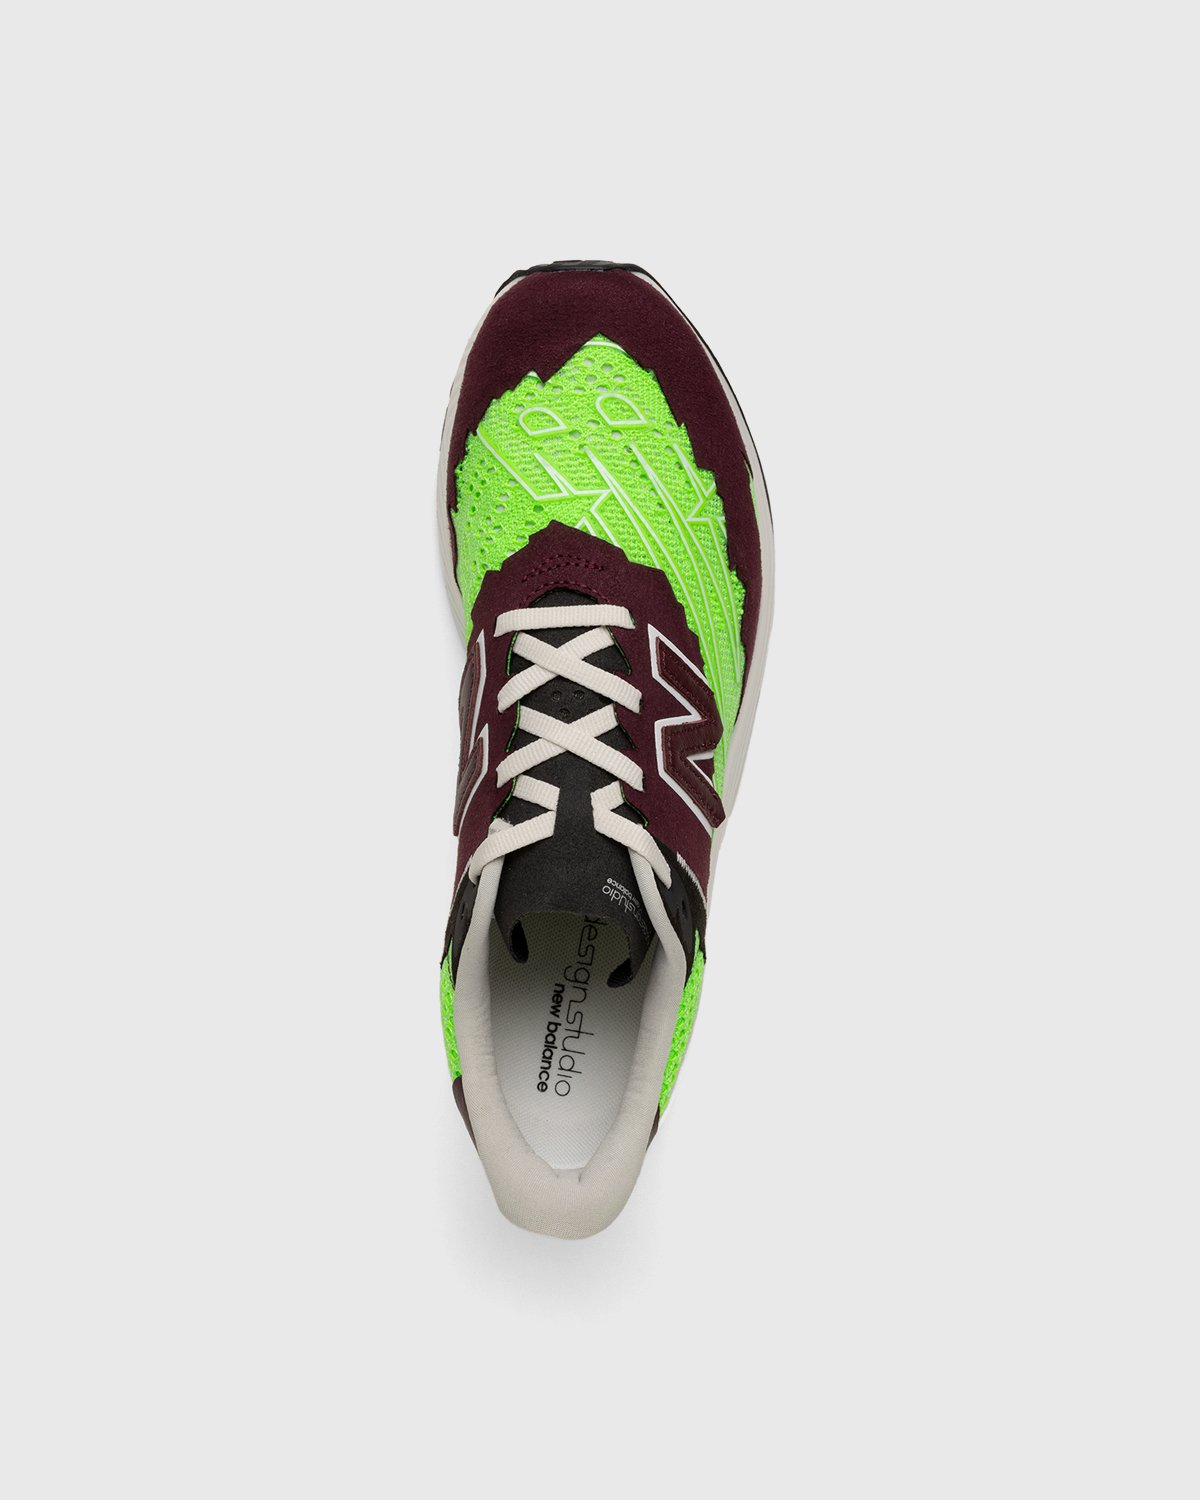 New Balance x Stone Island - FuelCell RC Elite v2 Energy Lime - Footwear - Green - Image 5